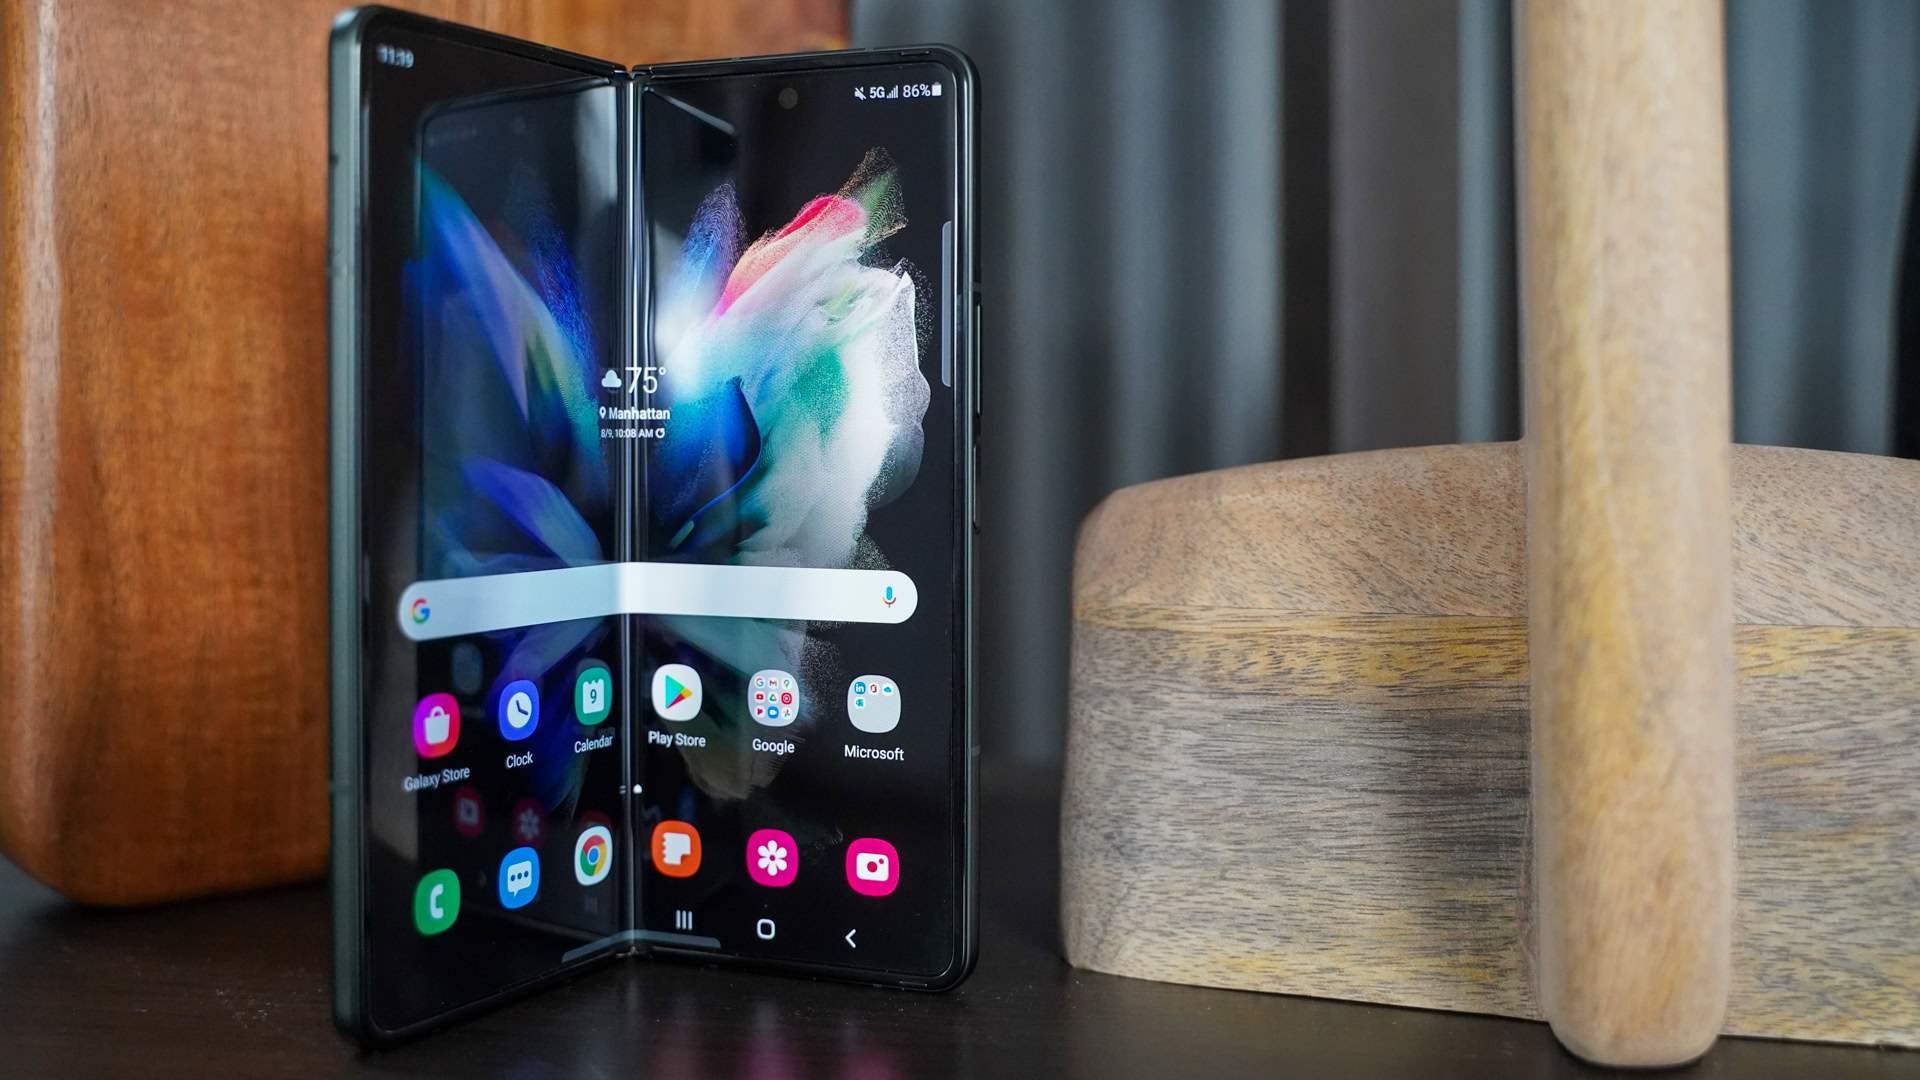 Samsung Galaxy Z Fold 3 buyer's guide: Info you need - Android Authority